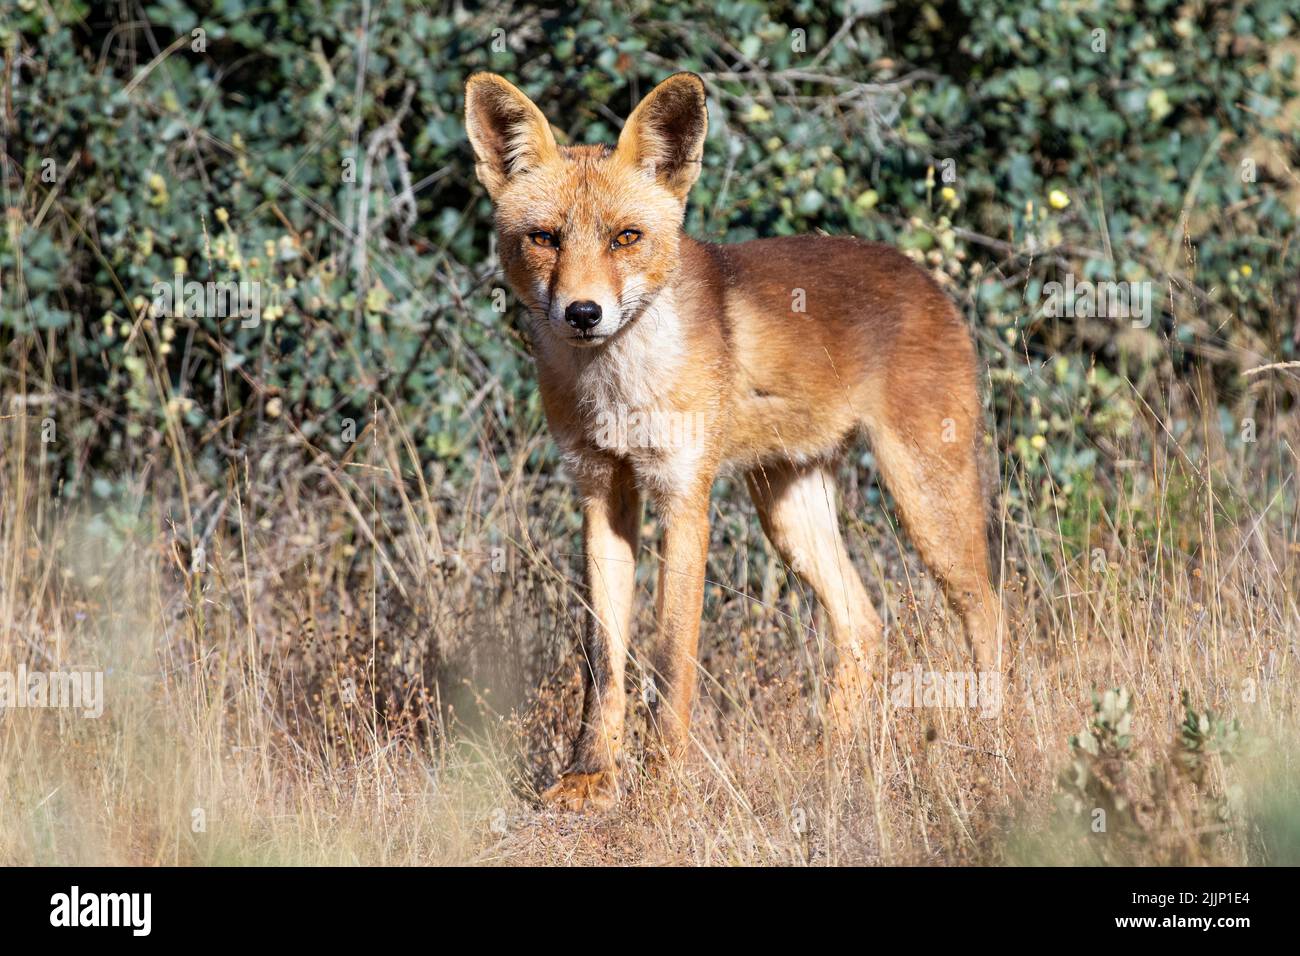 Wild vulpes vulpes fox looking at camera while standing on grass near lush shrubs outside forest in summer Stock Photo